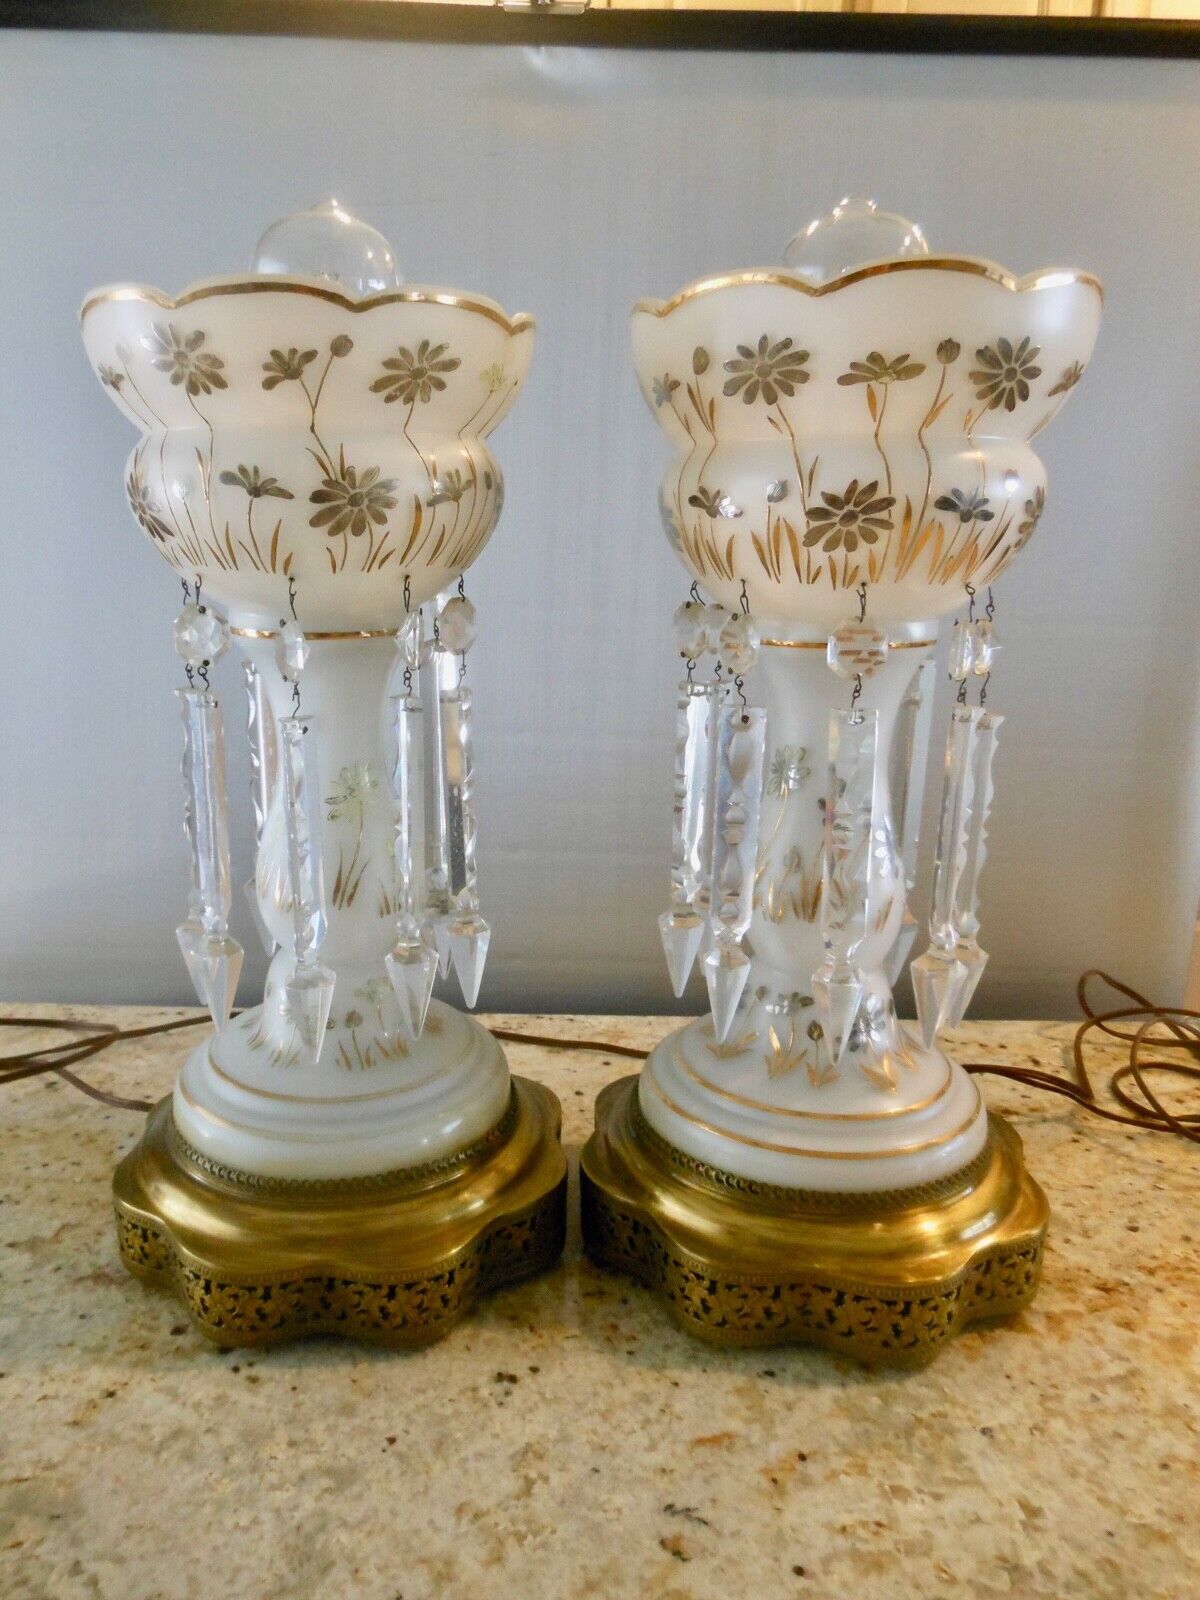 Antique Pair (2) of German Lustre Ware Mantle Lamps ~ White/Gold/Silver w/Prisms